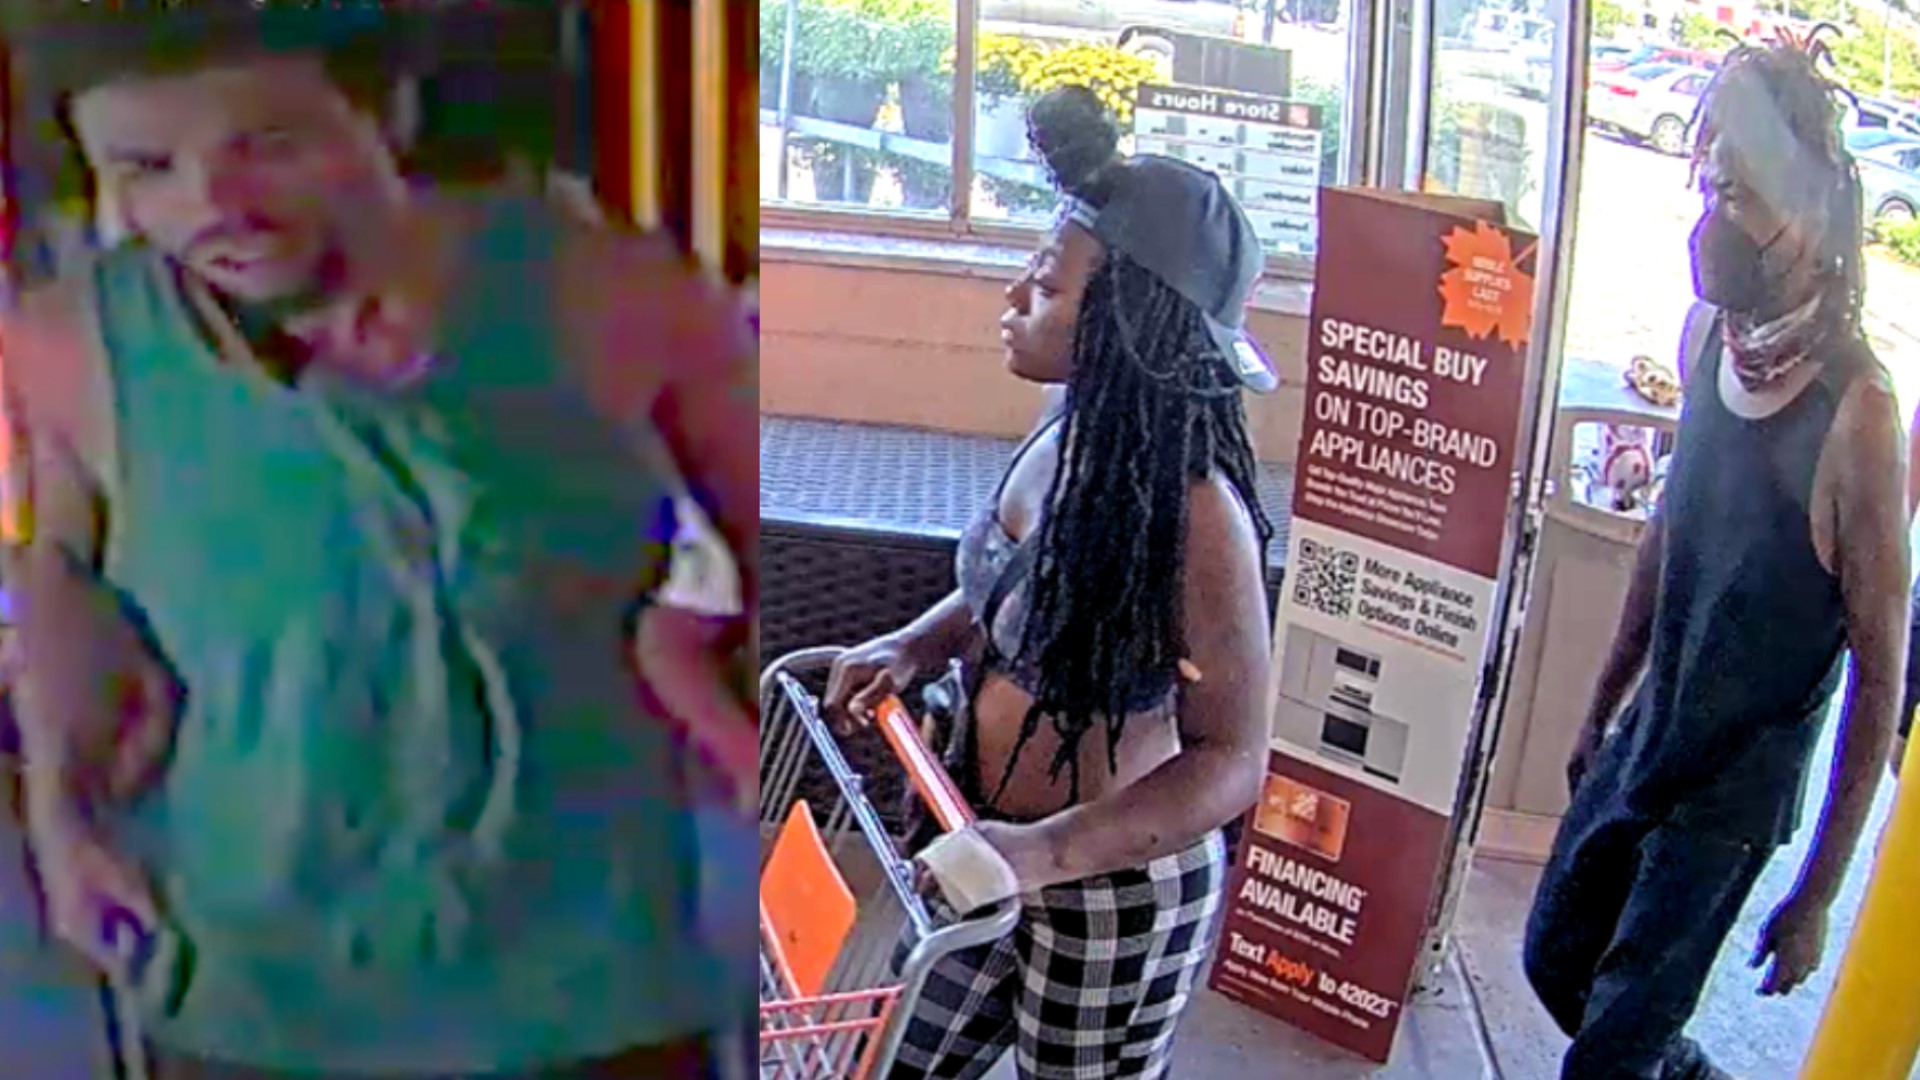 Police ask for help locating suspects in Home Depot robbery